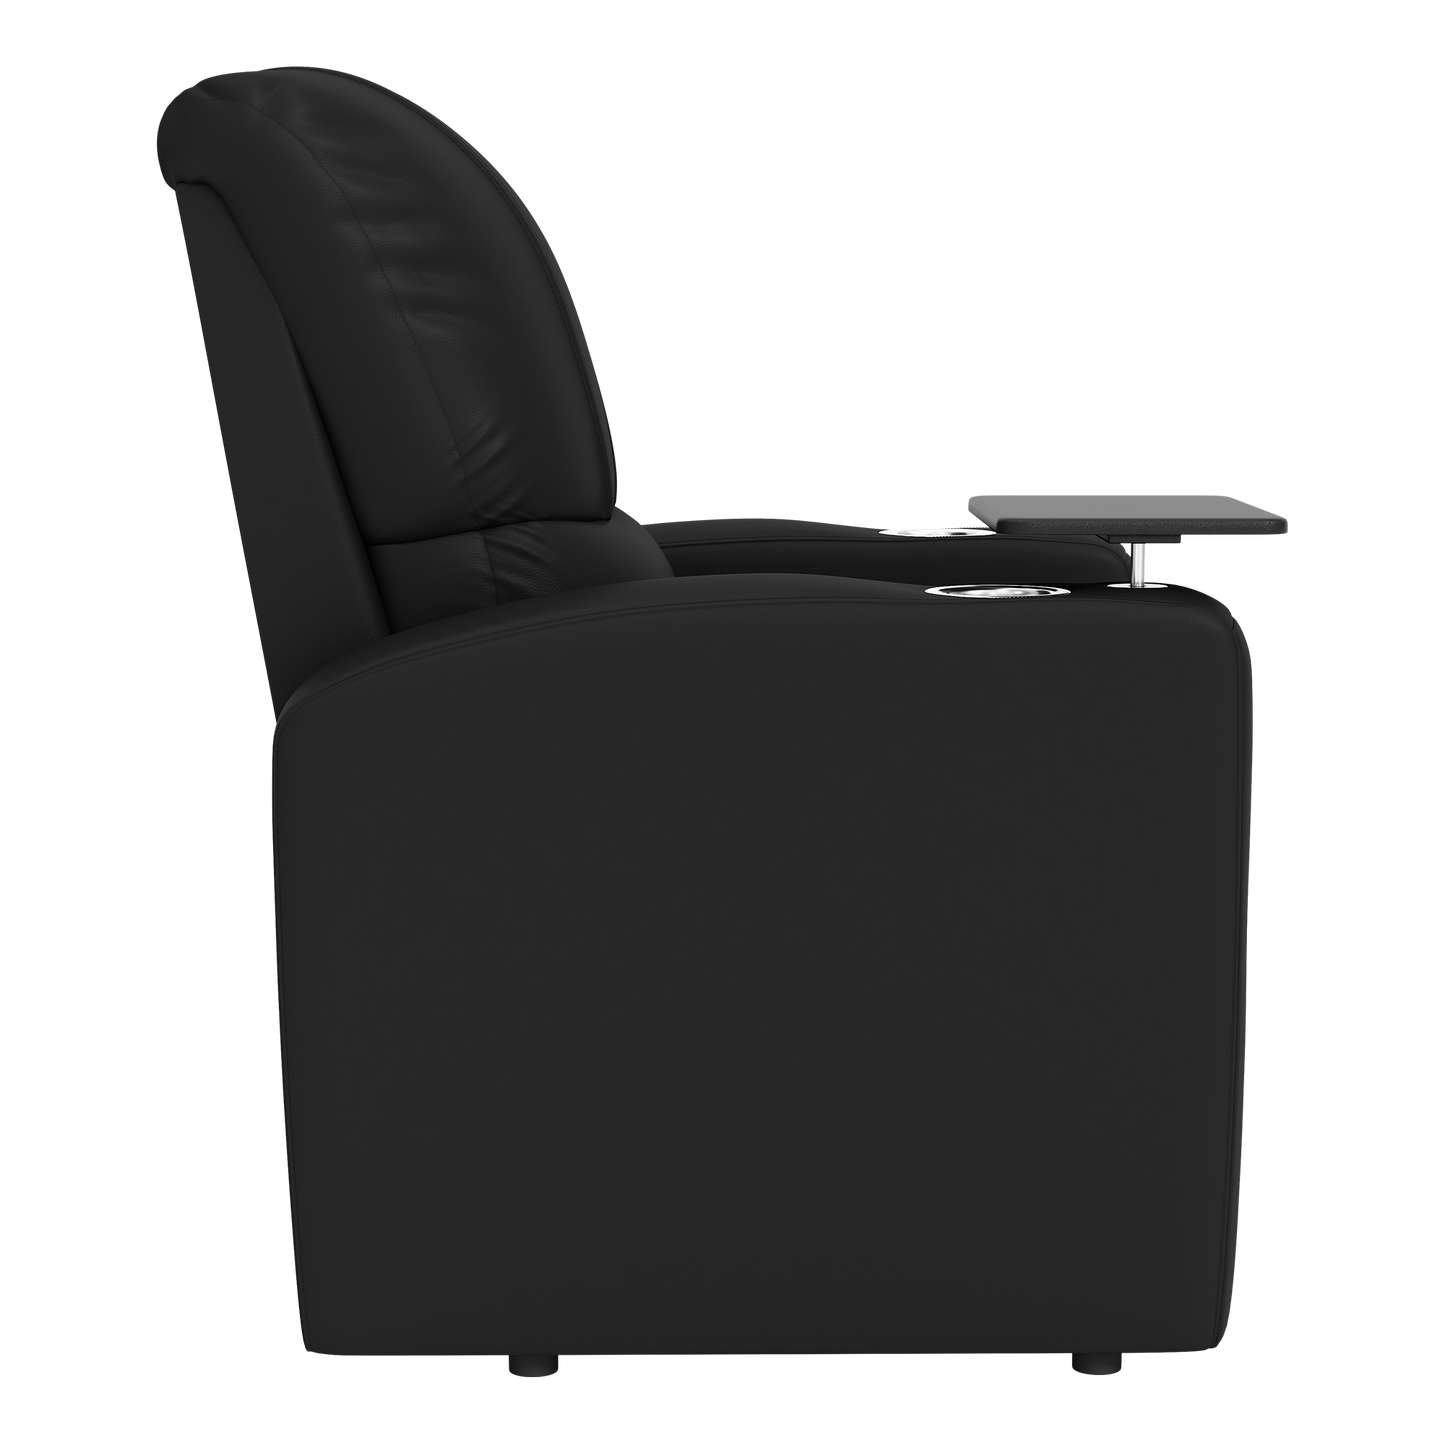 Stealth Power Plus Recliner with Bucks Gaming Global Logo [Can Only Be Shipped to Wisconsin]